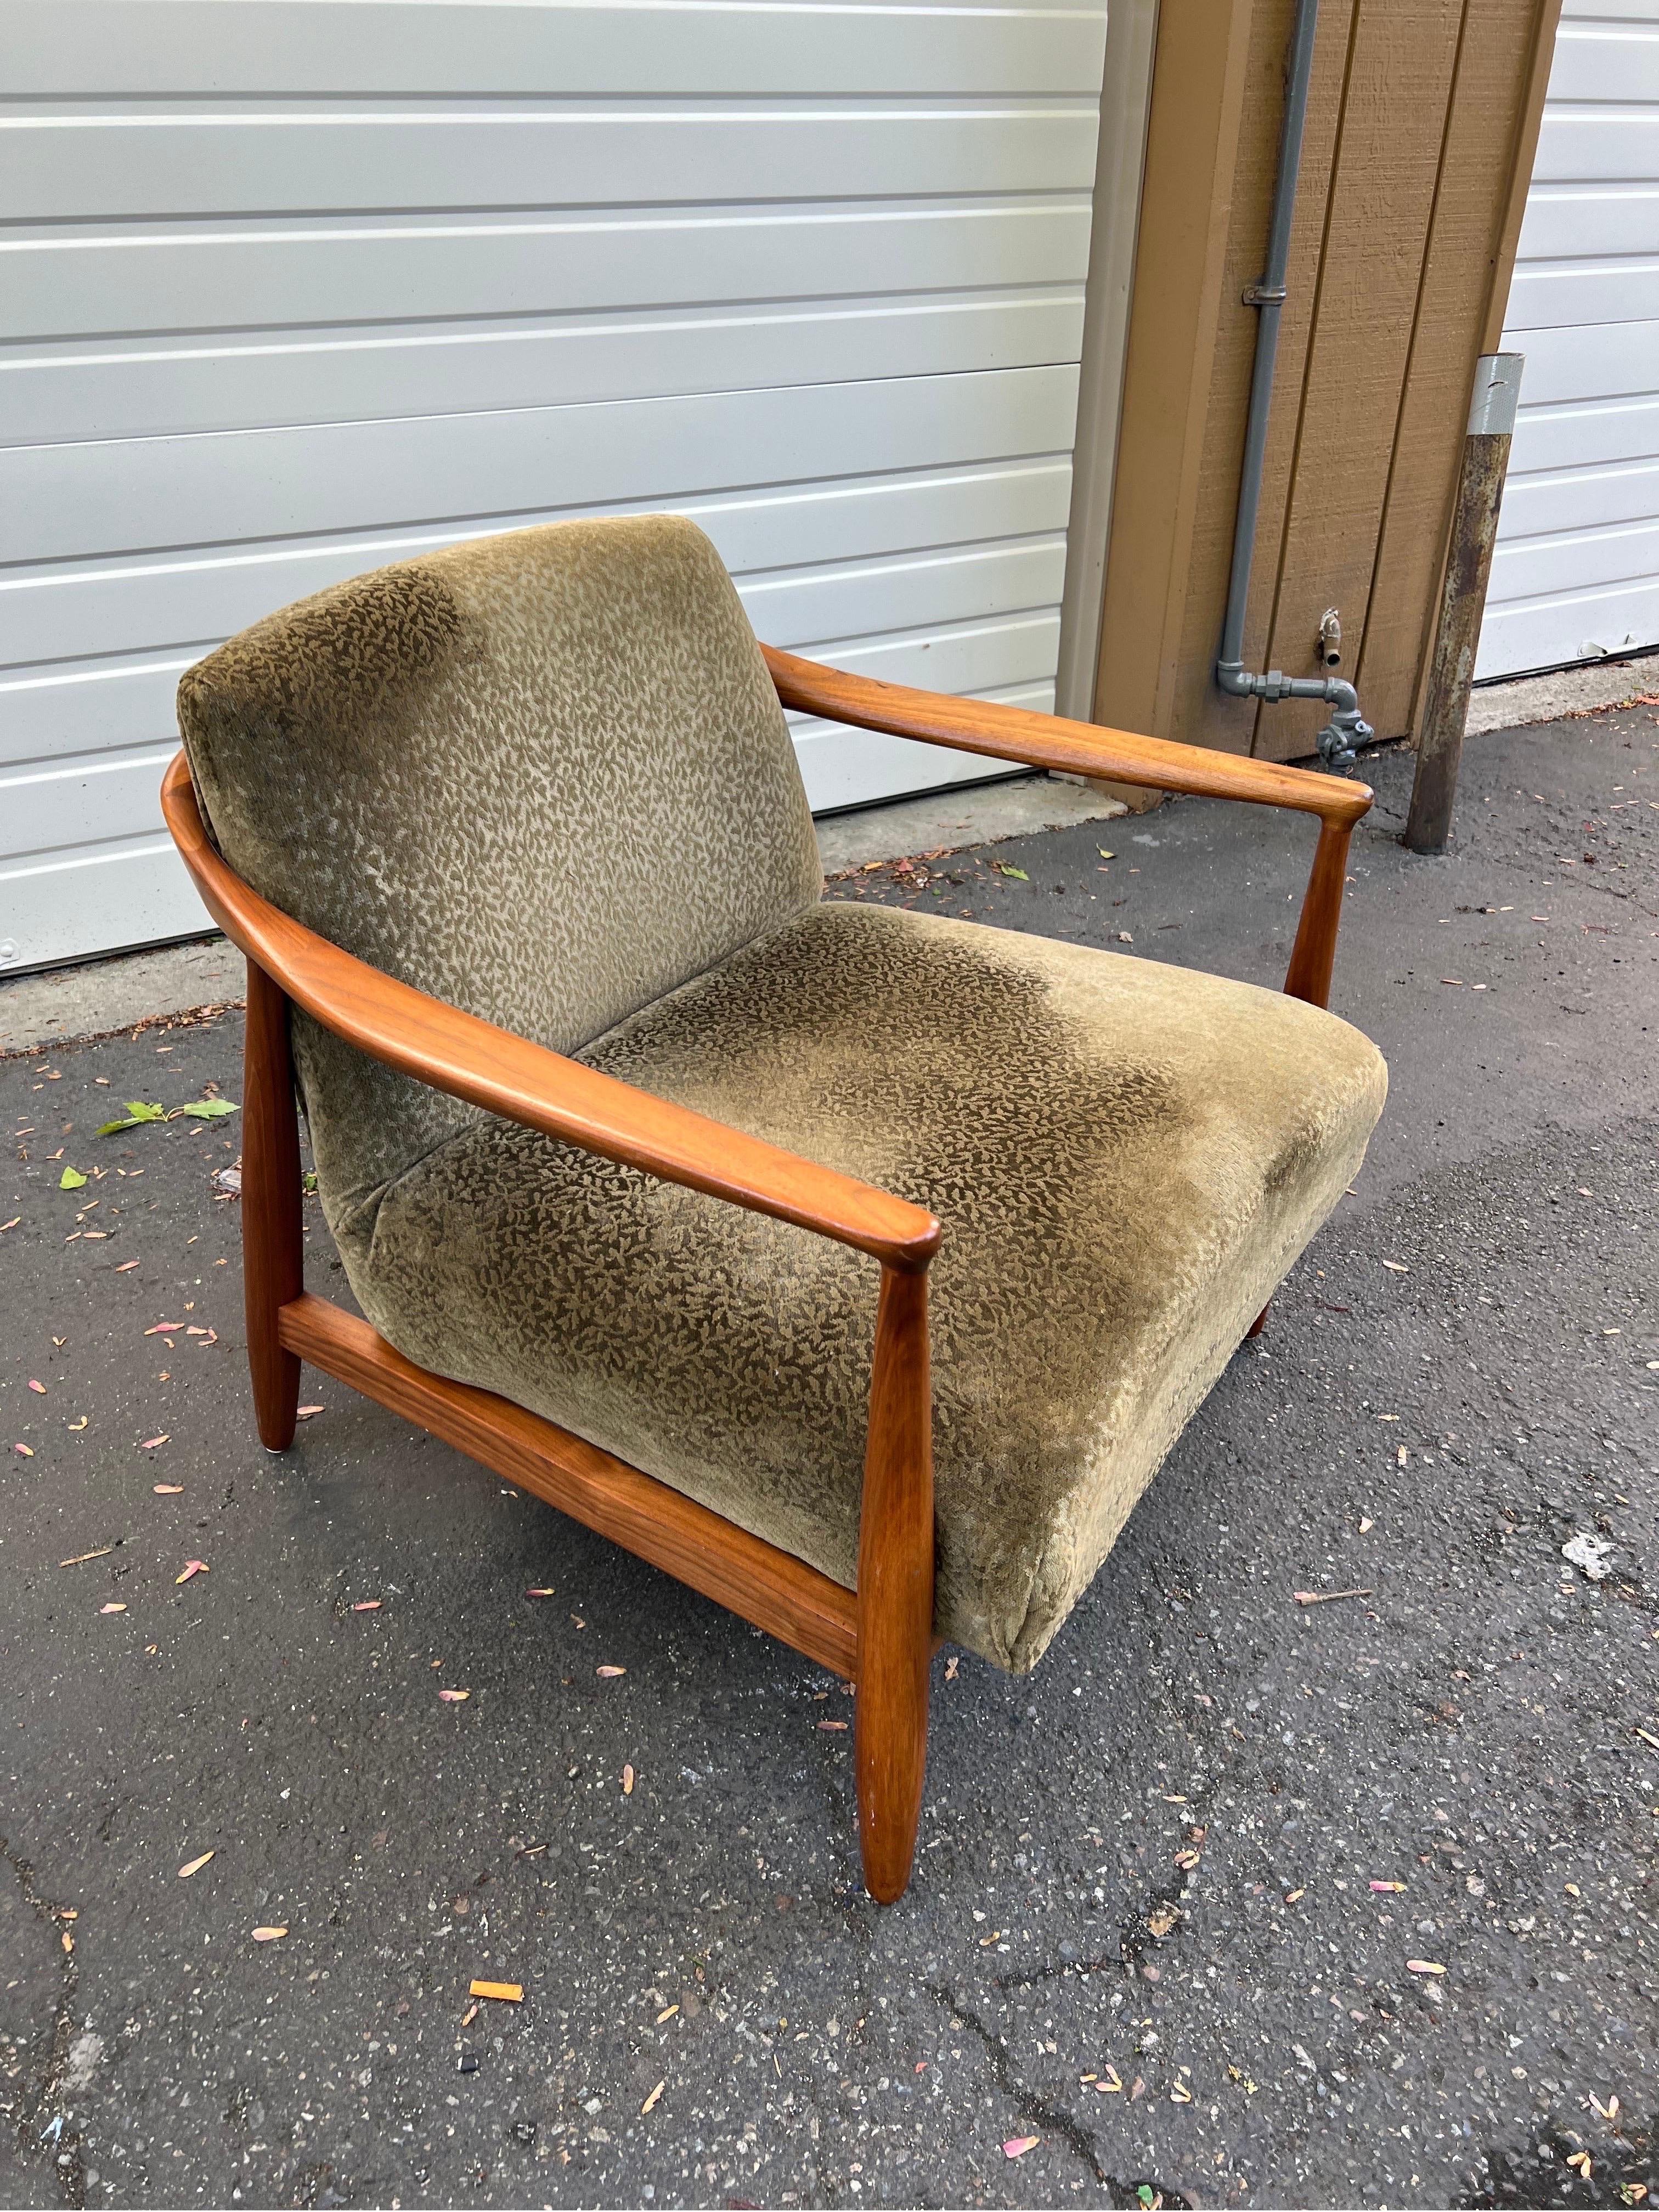 Vintage Walnut Mid-Century Modern Chair with Olive Green Velvet Upholstery 

Dimensions. 29 W ; 28 H ; 30 D.